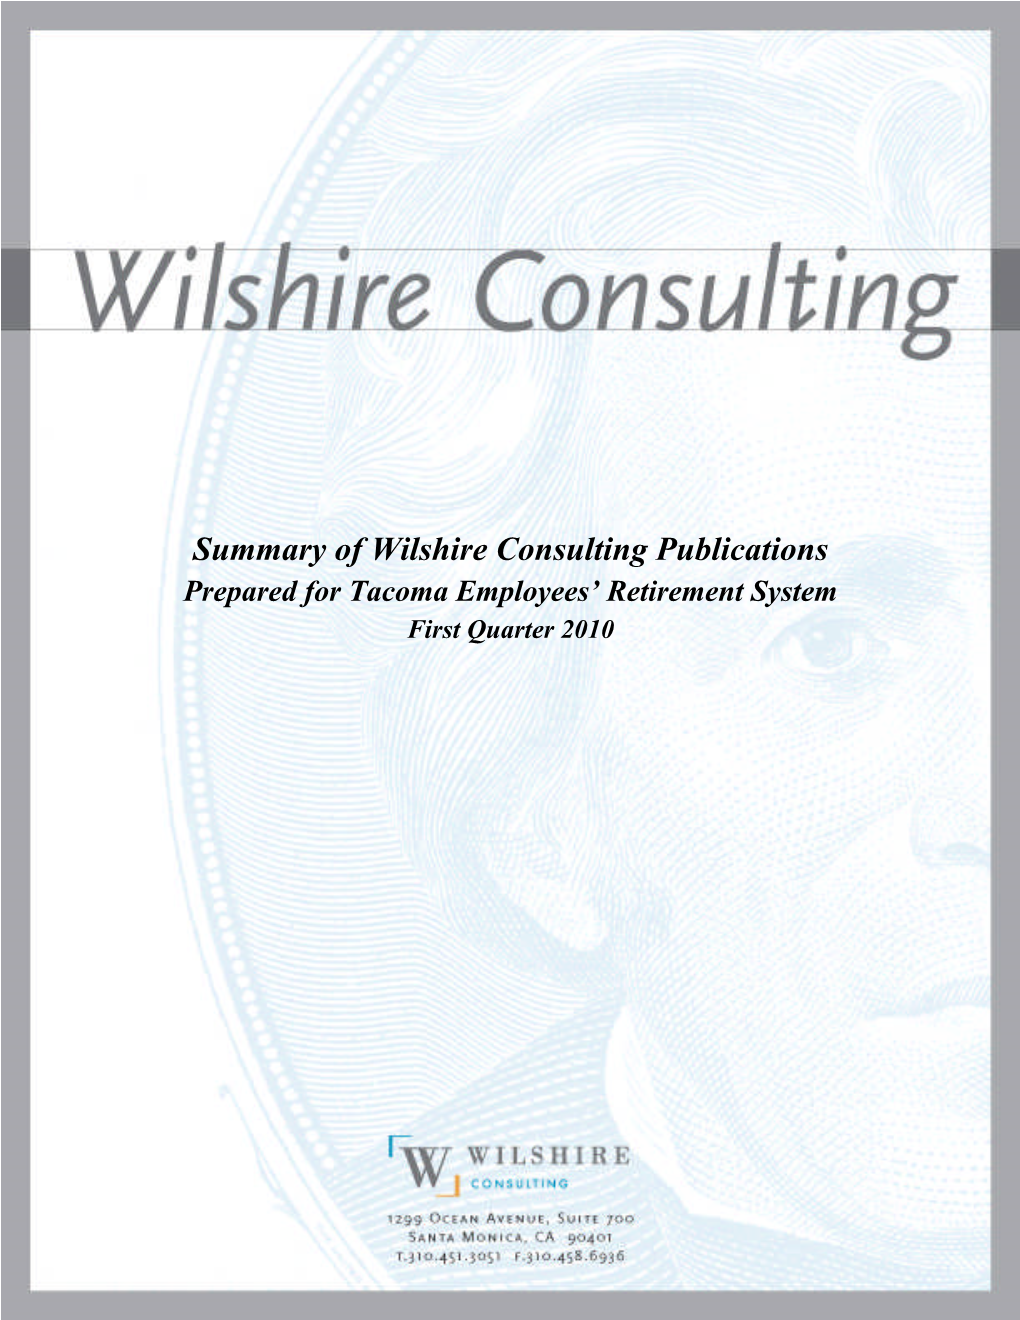 Summary of Wilshire Consulting Publications March 31, 2010